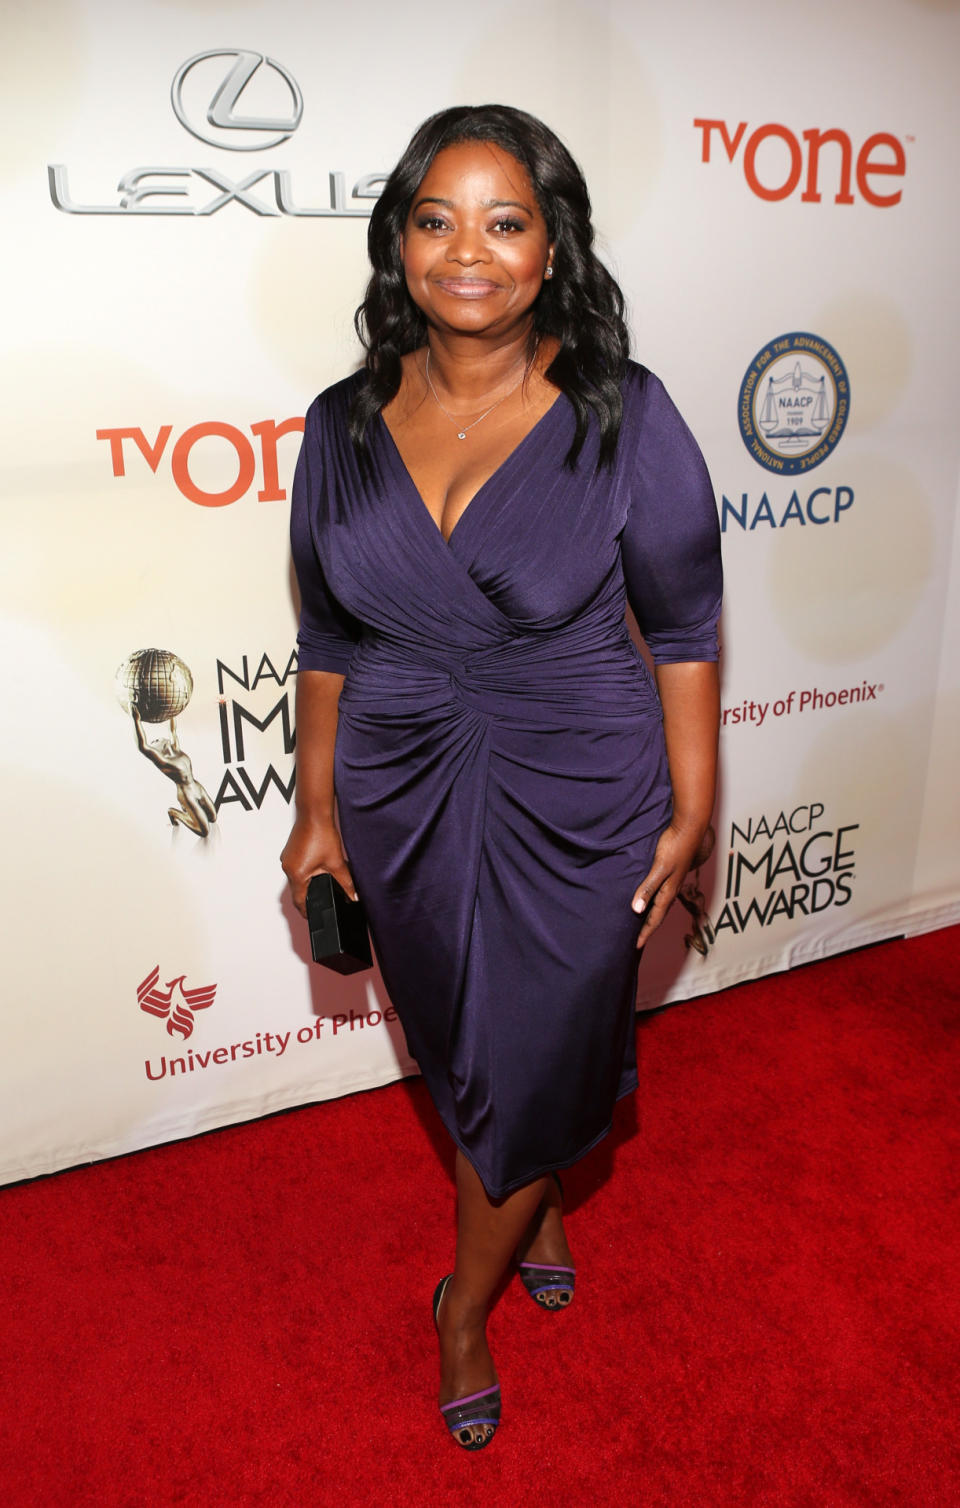 Octavia Spencer at the 46th Annual NAACP Image Awards